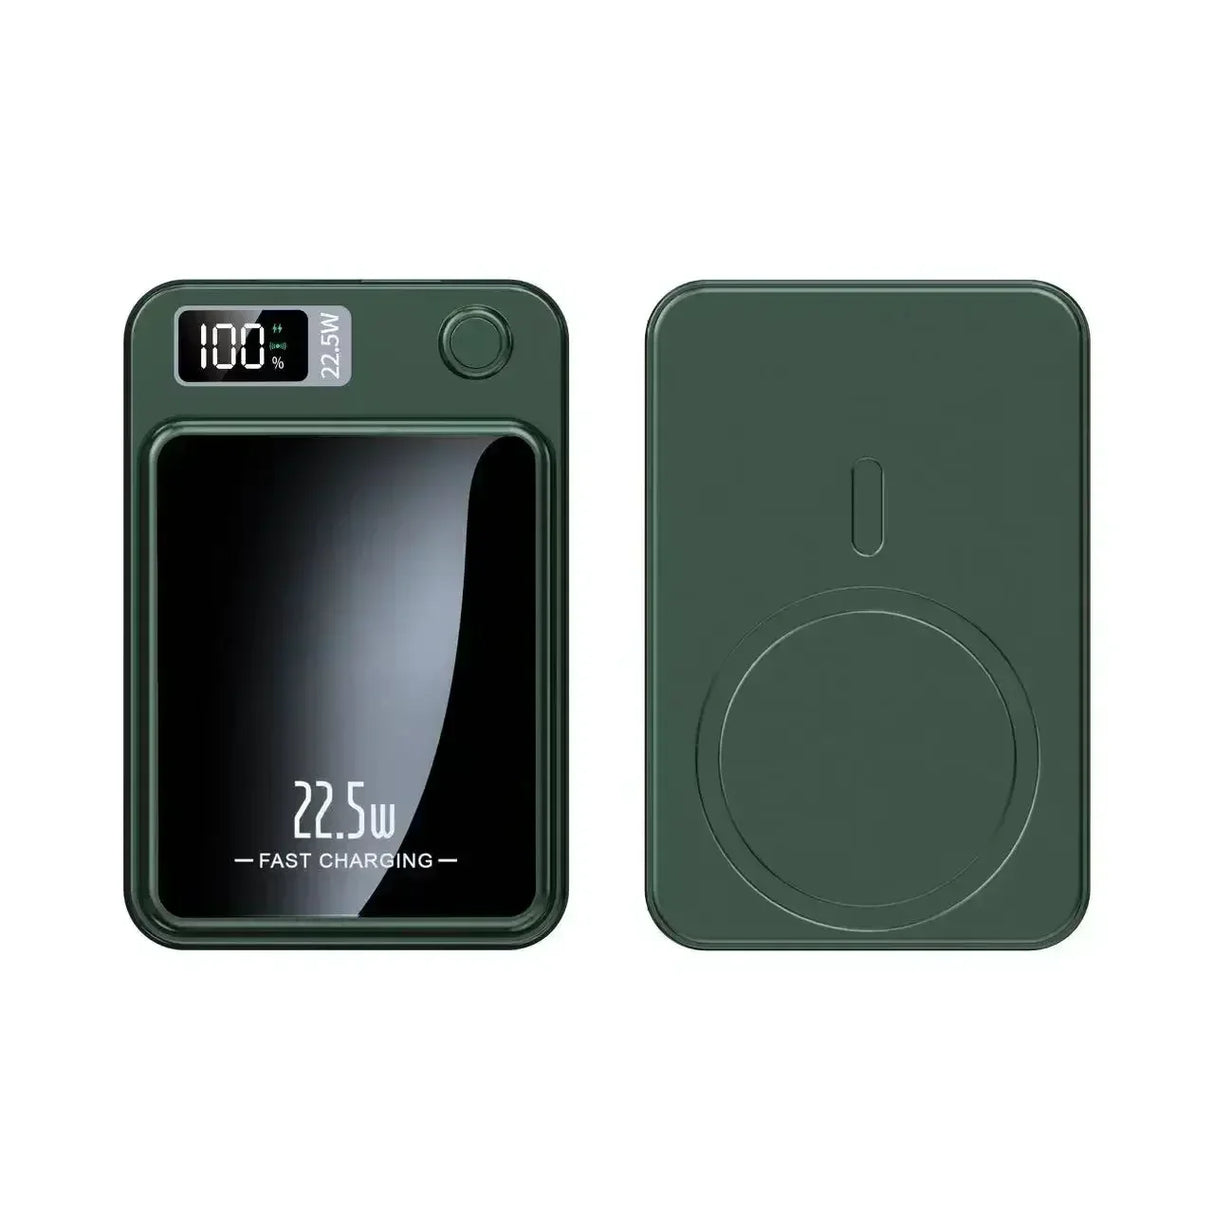 the green case is attached to the back of the phone